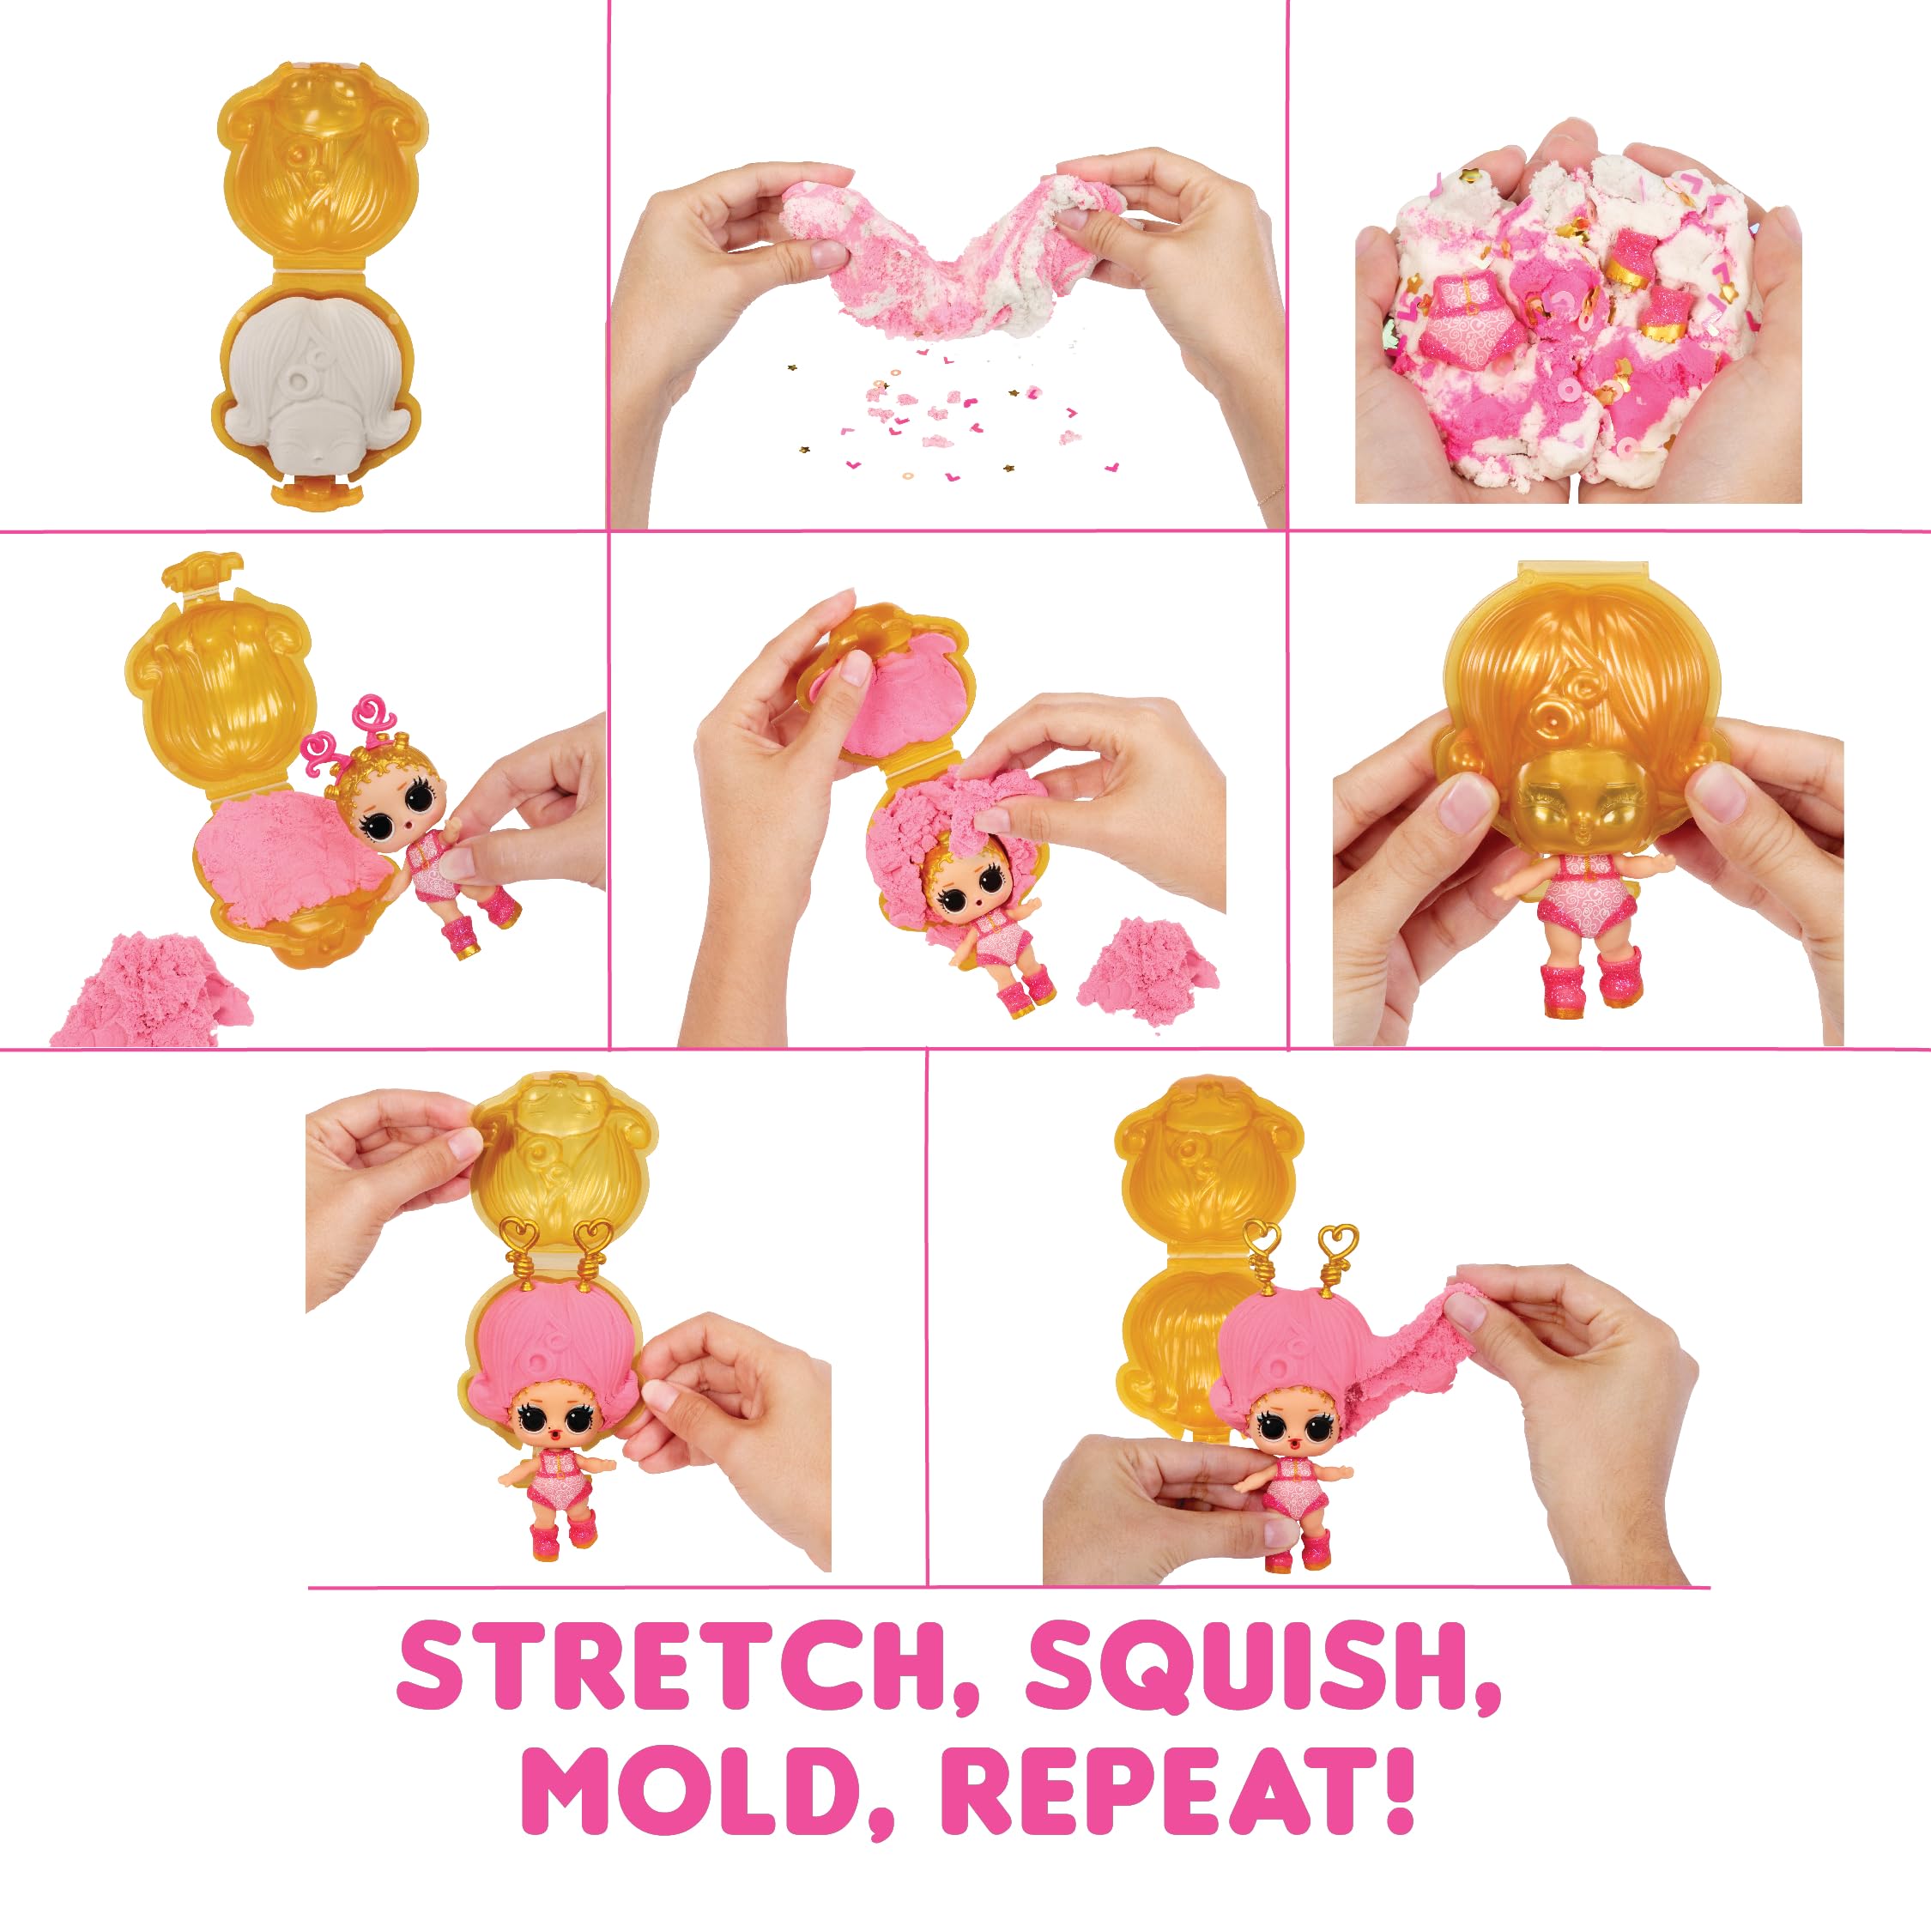 LOL. Surprise! Squish Sand Magic Hair Tots- with Collectible Doll, Squish Sand Dolls, Surprises, Limited Edition Doll- Great Gift for Girls Age 3+